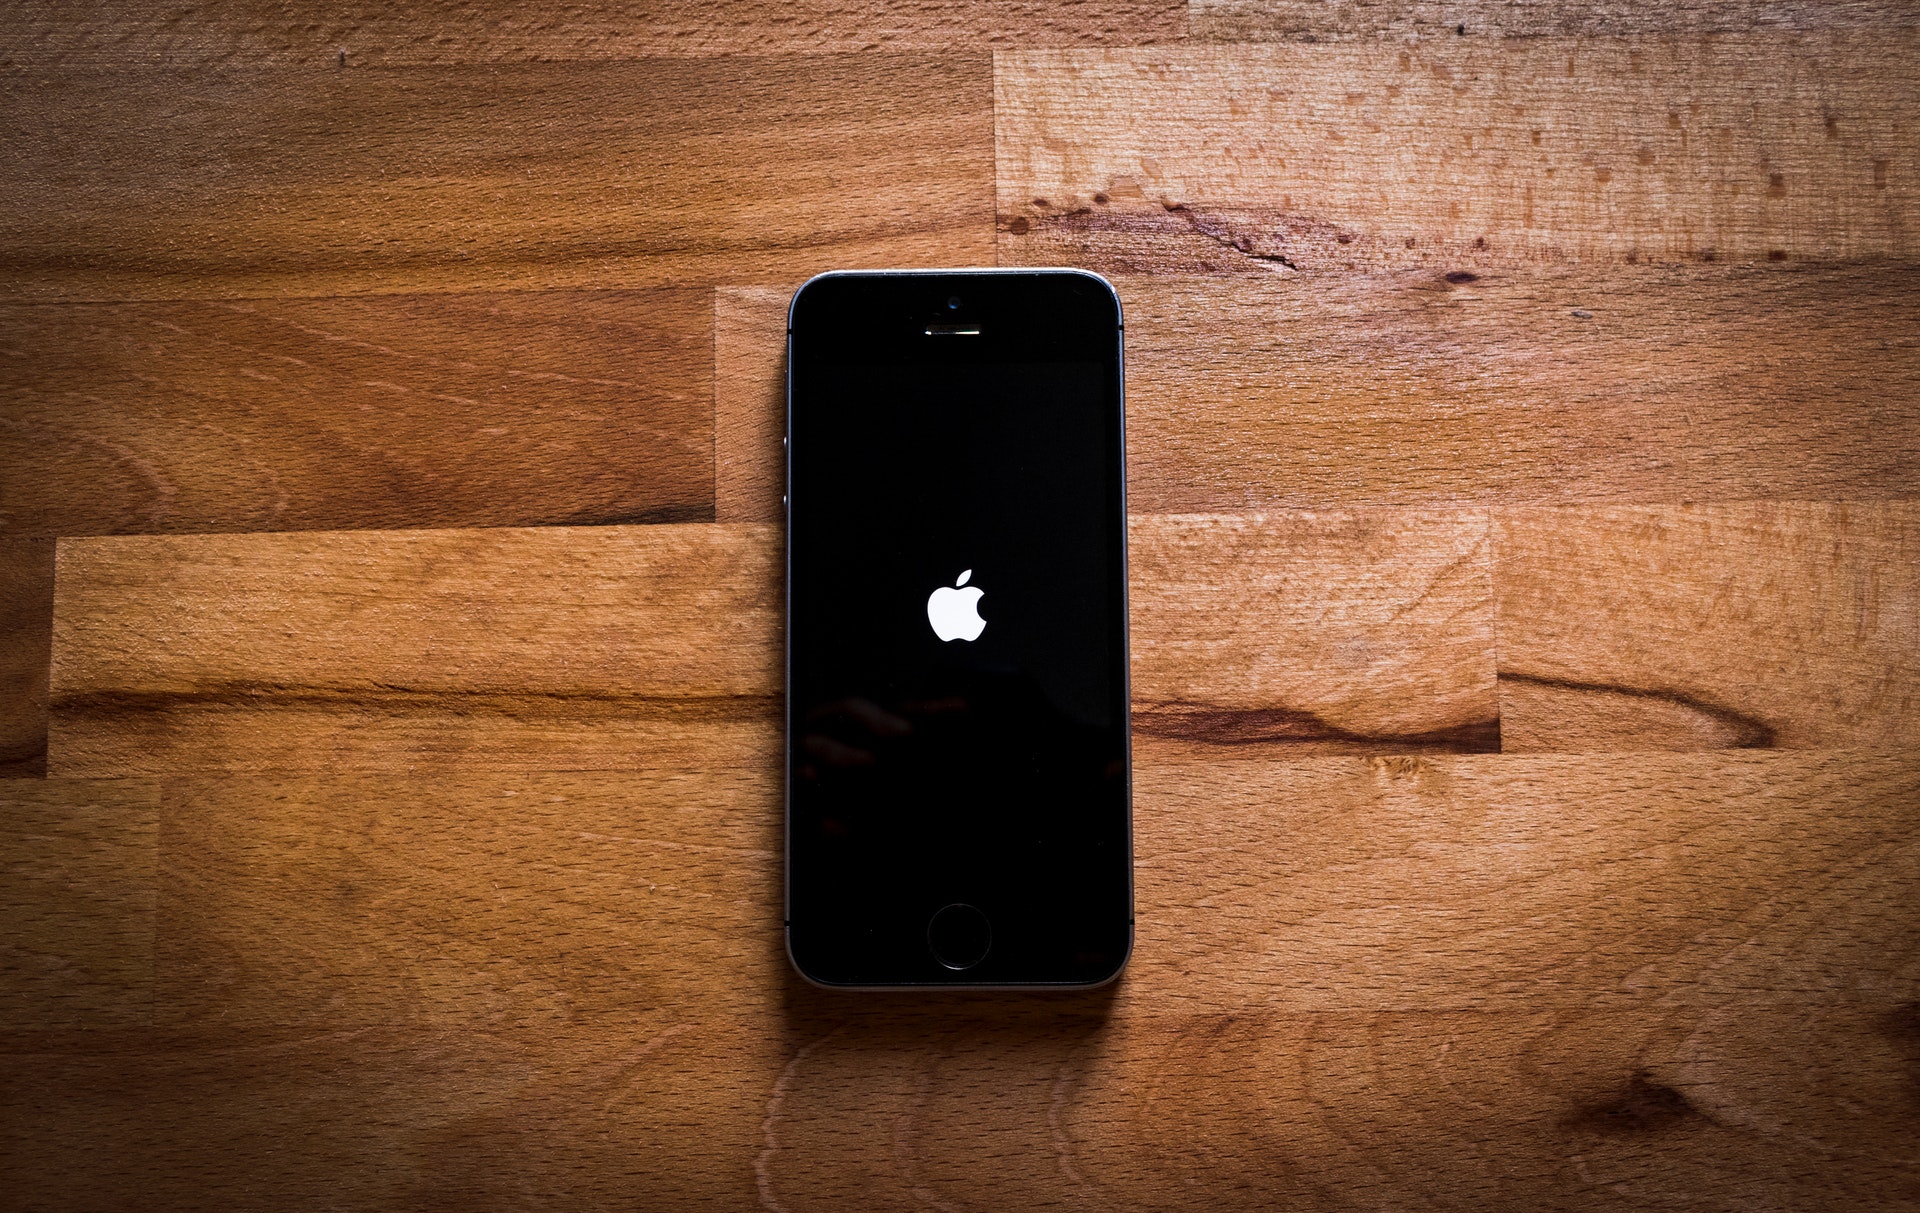 An iPhone powering up on a wooden table.